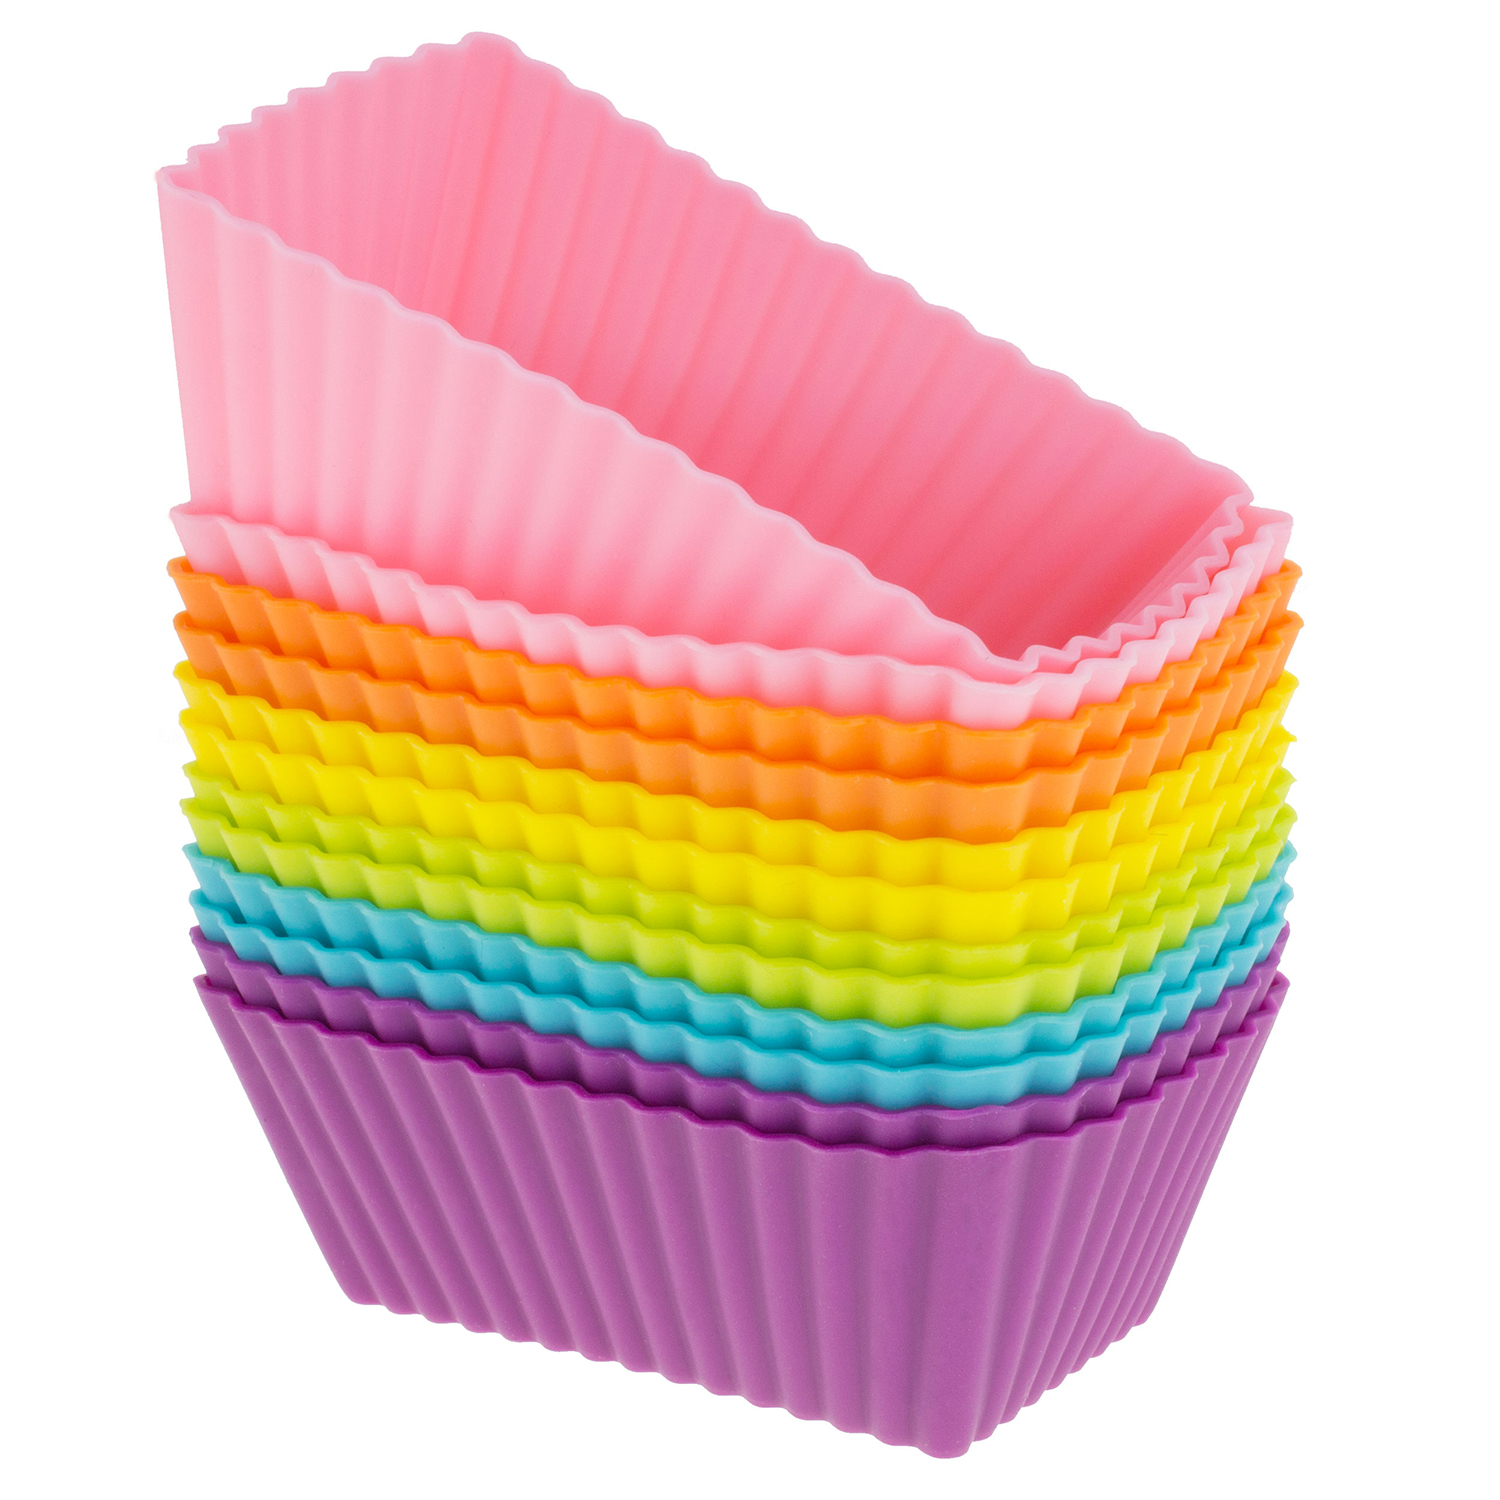 Freshware Silicone Cupcake Liners / Baking Cups - 12-Pack Muffin Molds, Rectangle, Six Vibrant Colors